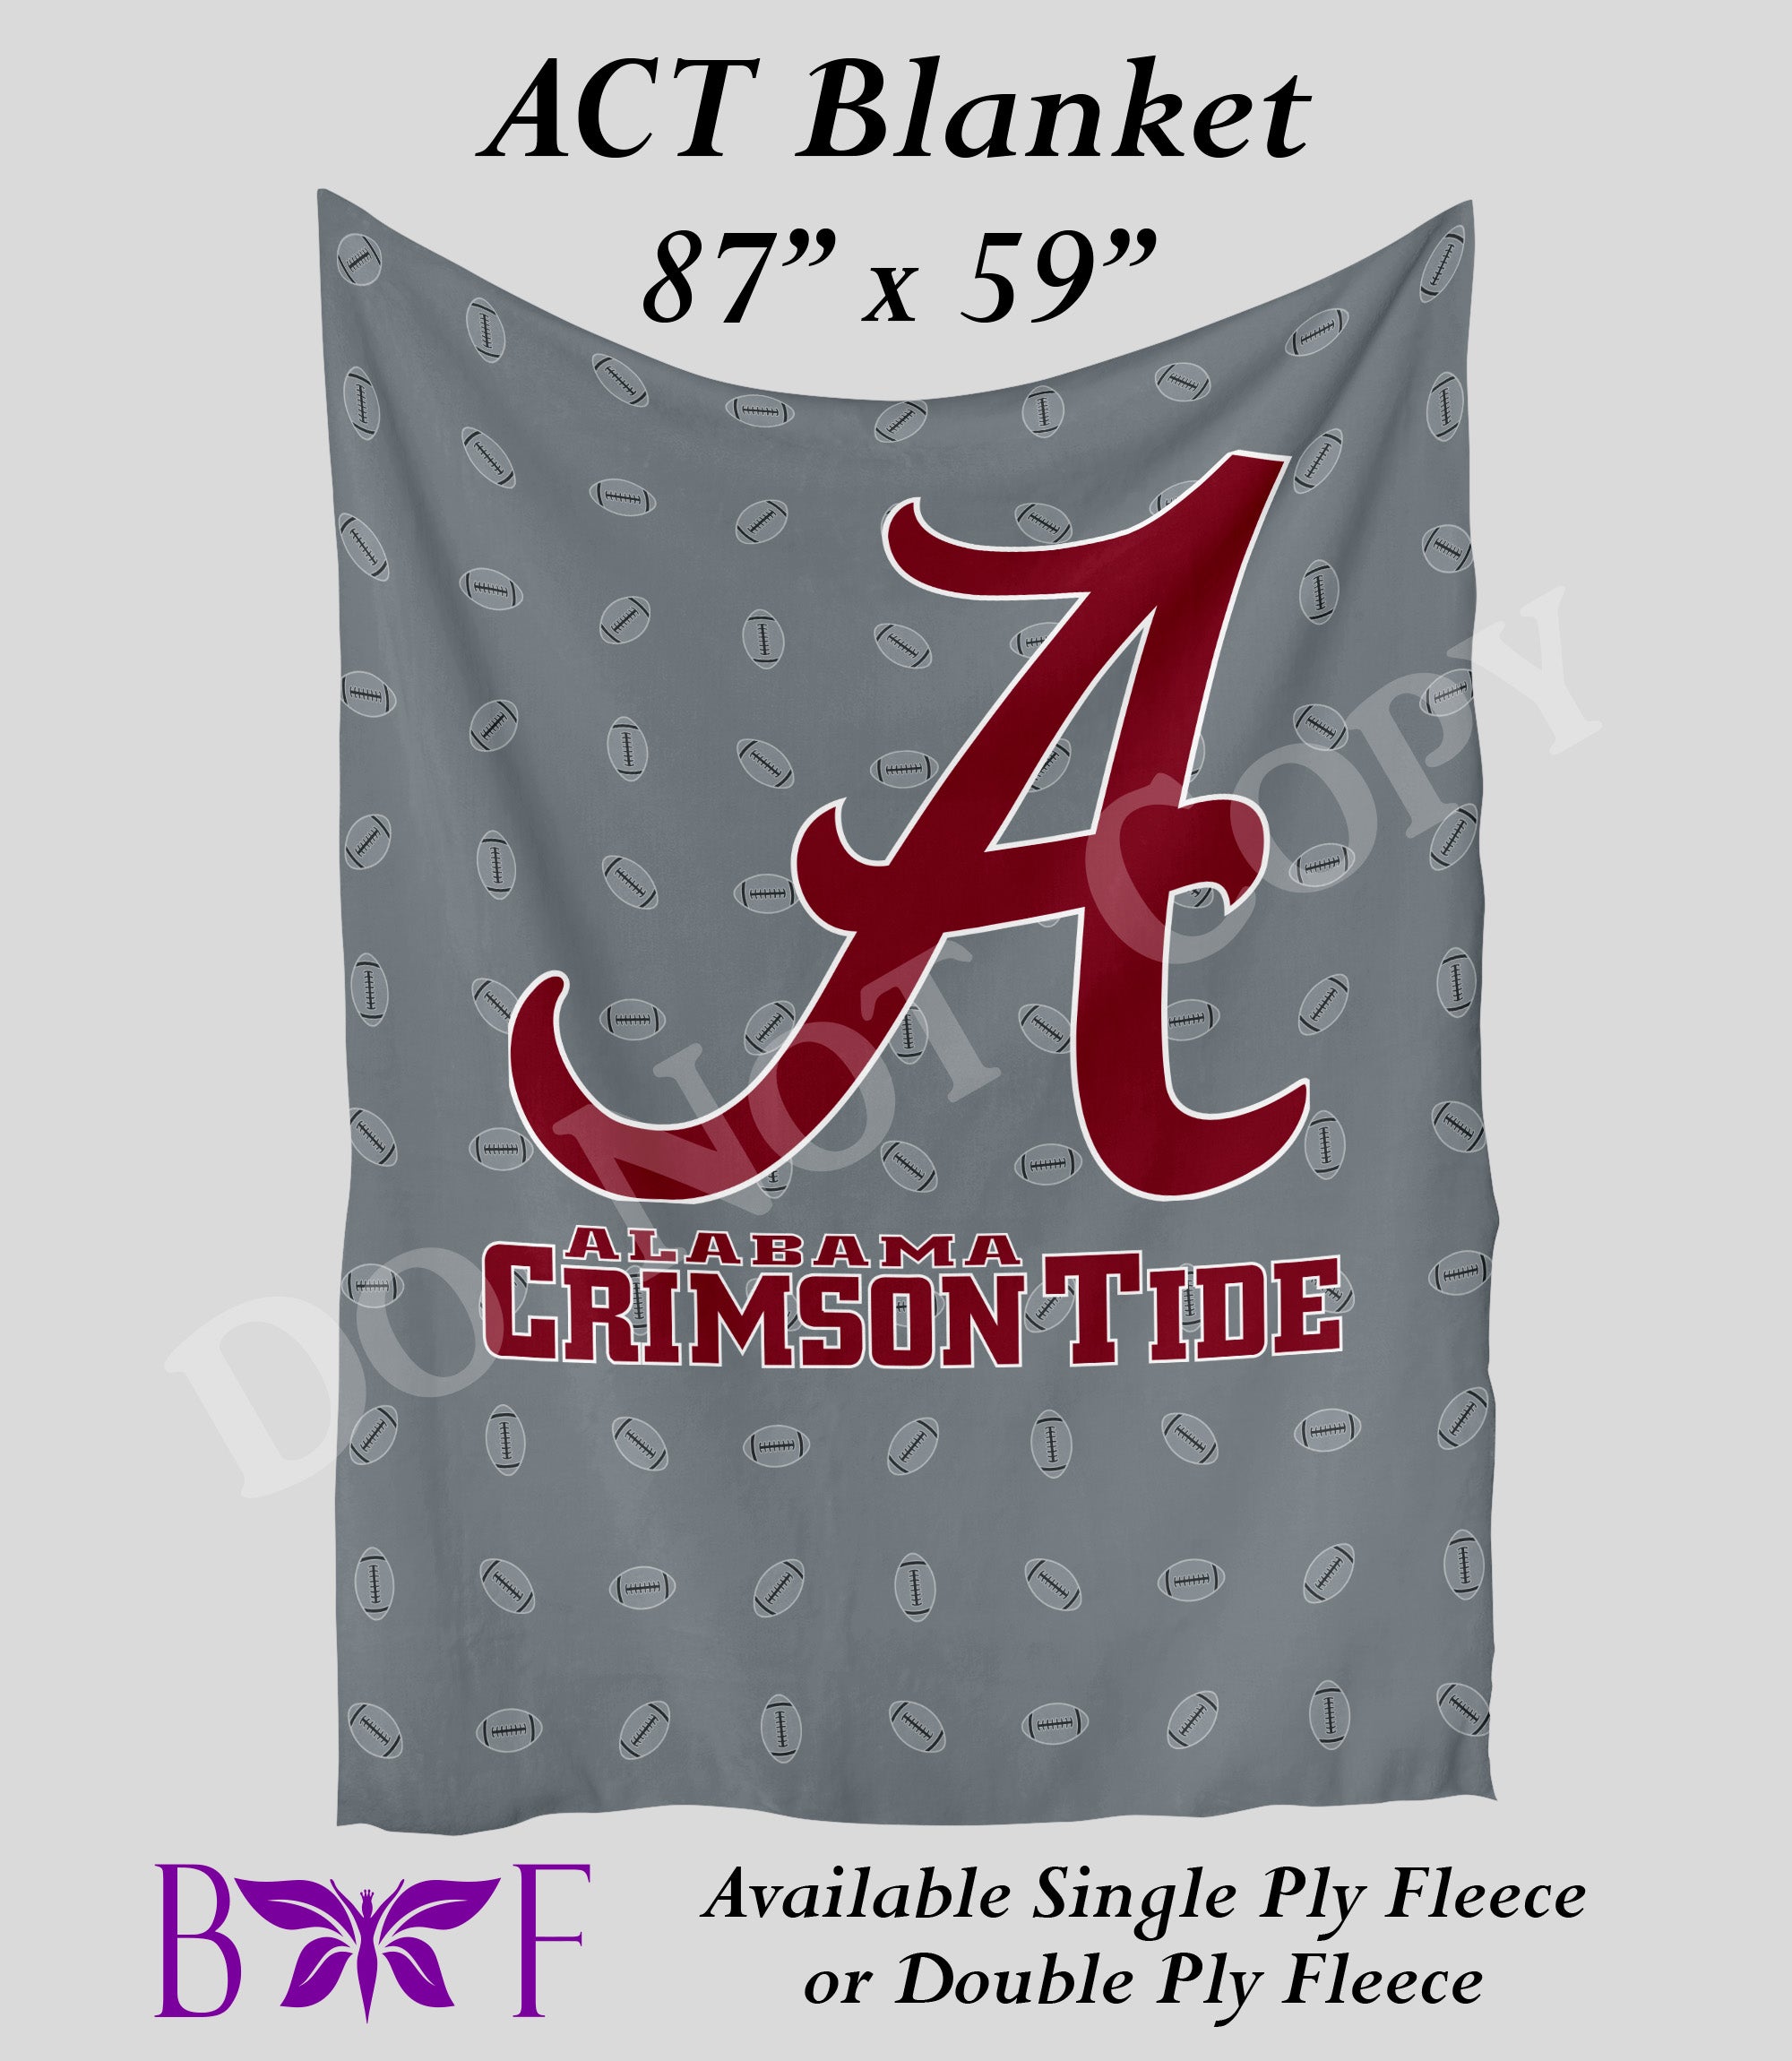 ACT 59"x87" soft blanket also available with sherpa fleece